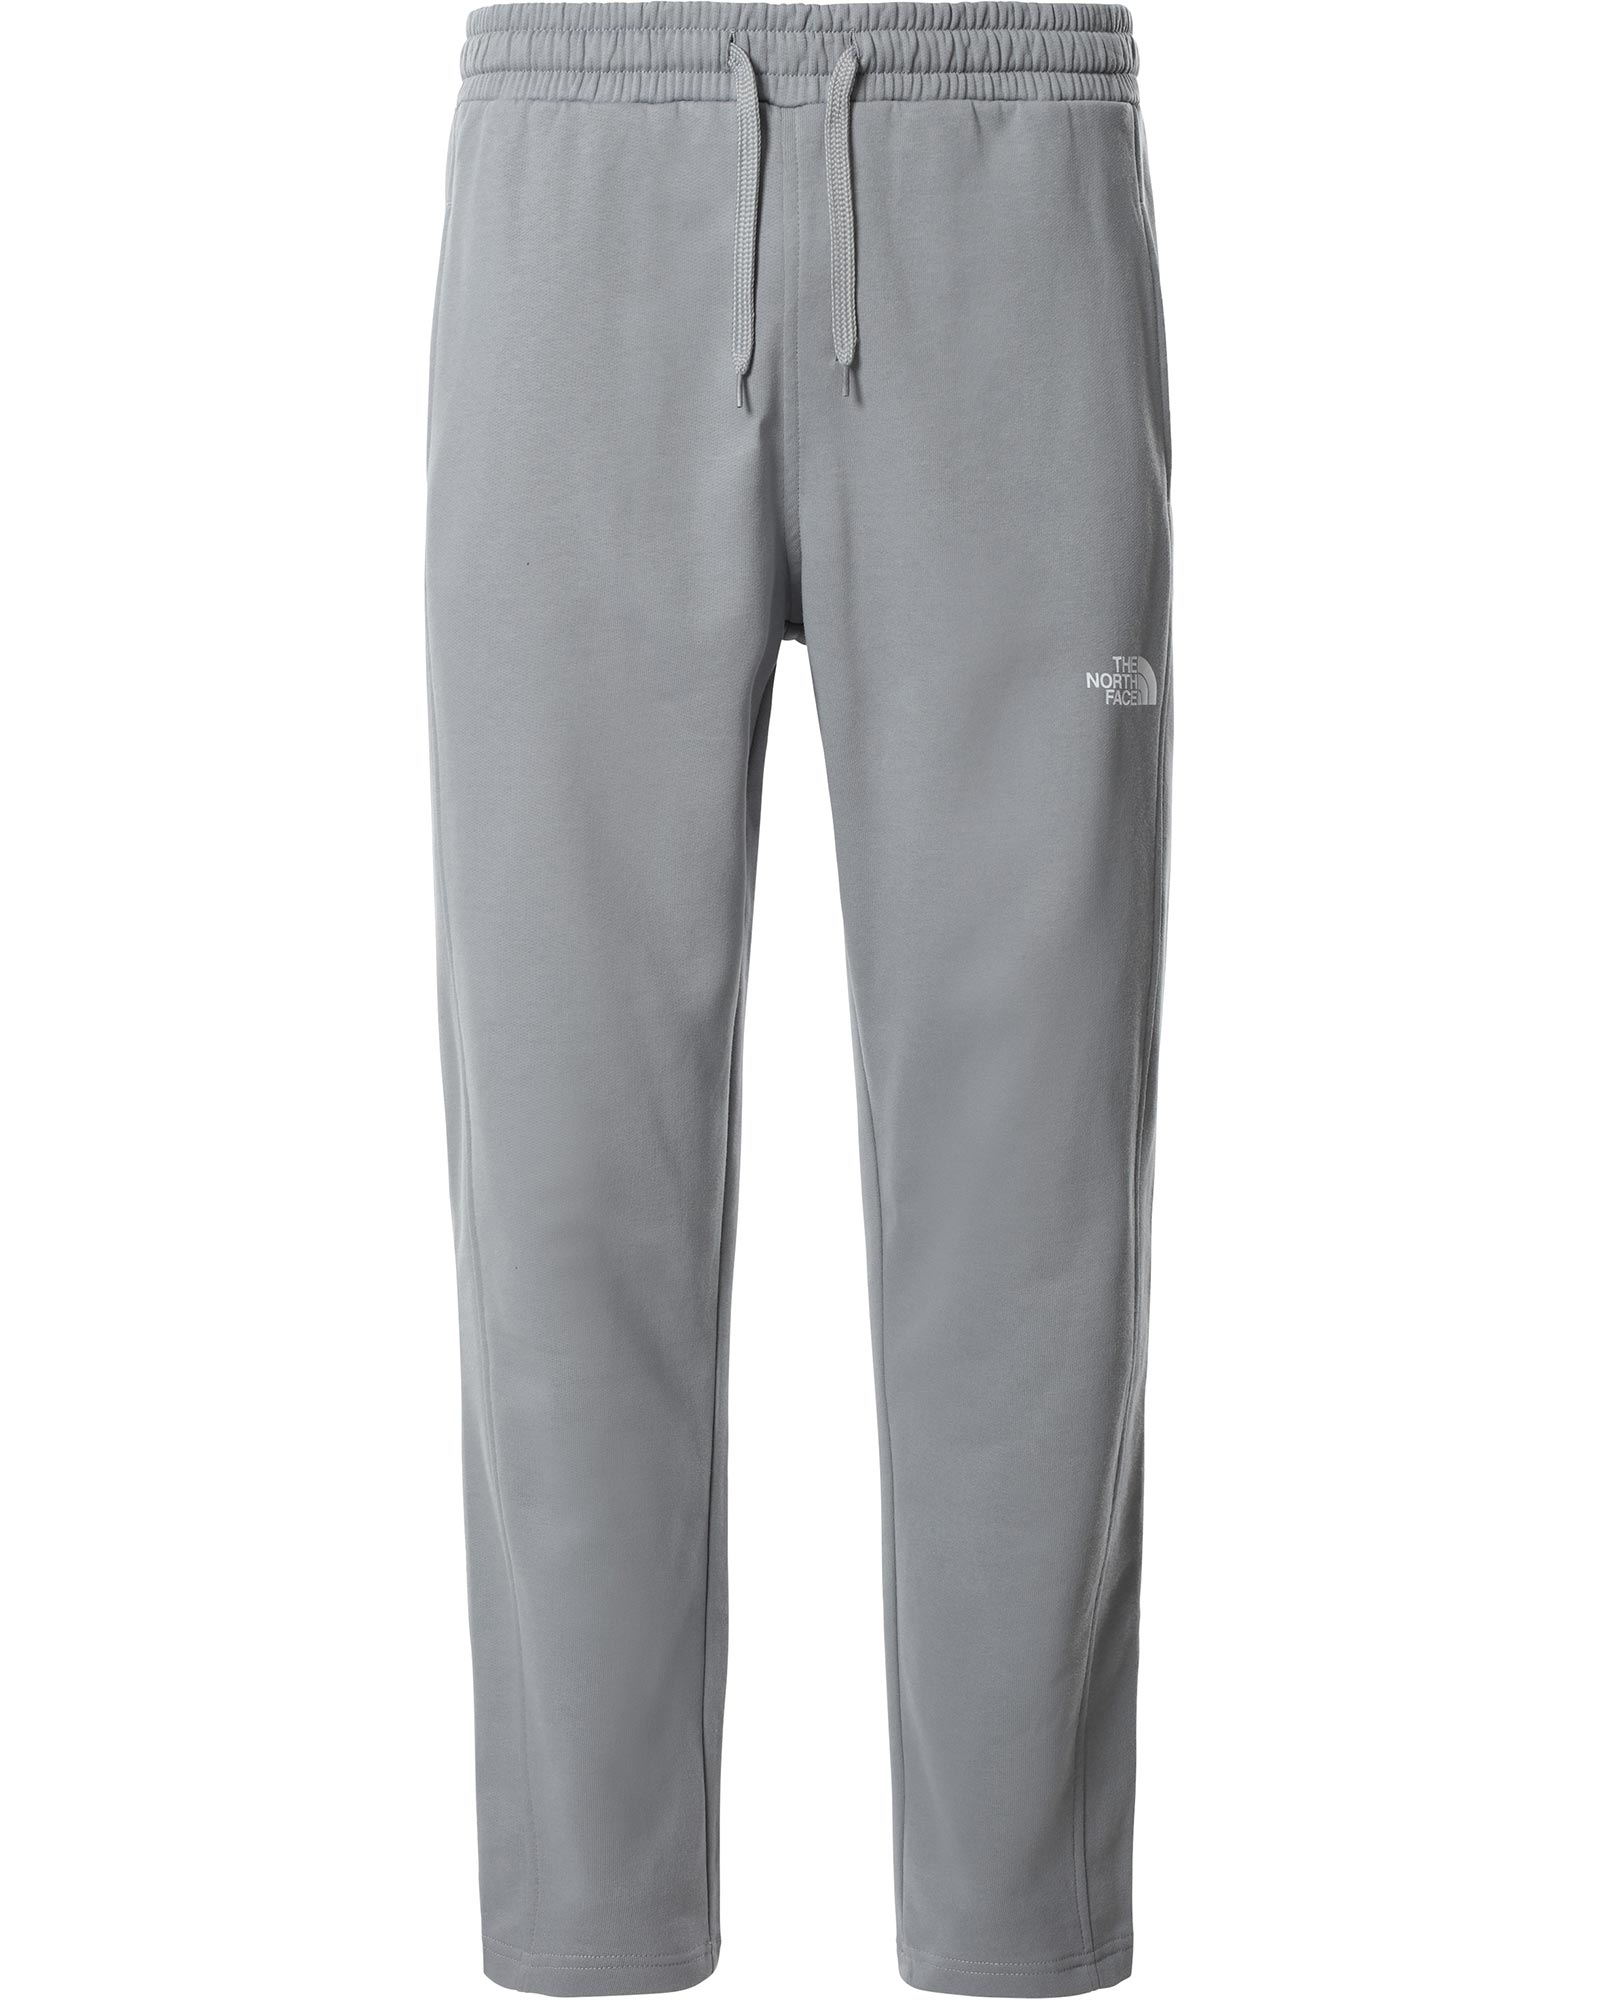 The North Face Standard Men’s Pants - Tradewinds Grey M